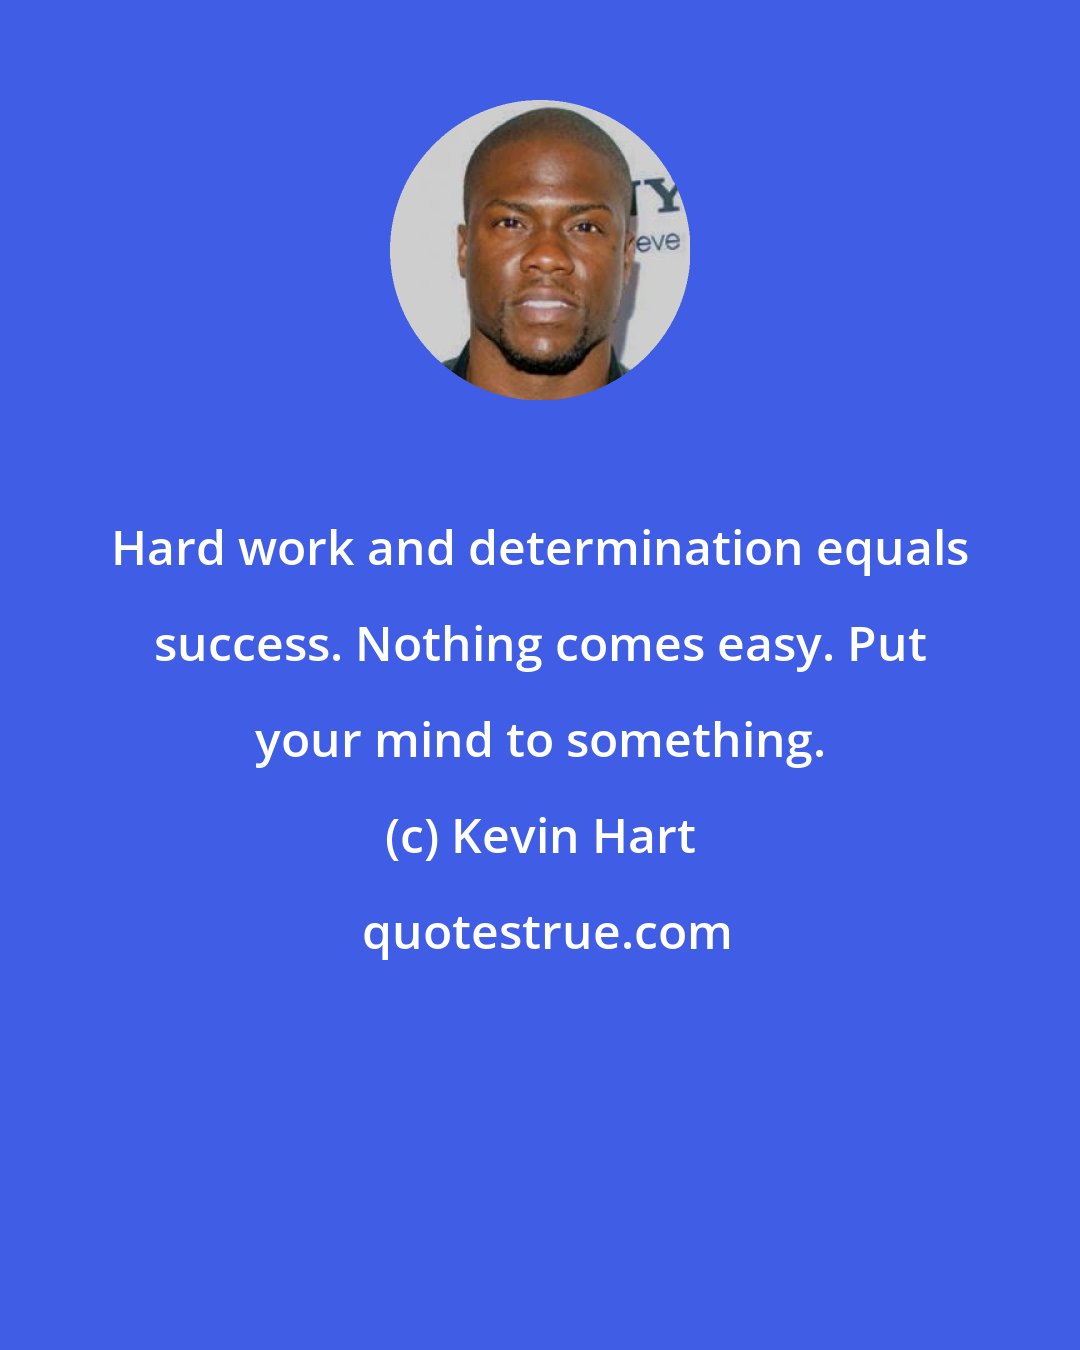 Kevin Hart: Hard work and determination equals success. Nothing comes easy. Put your mind to something.